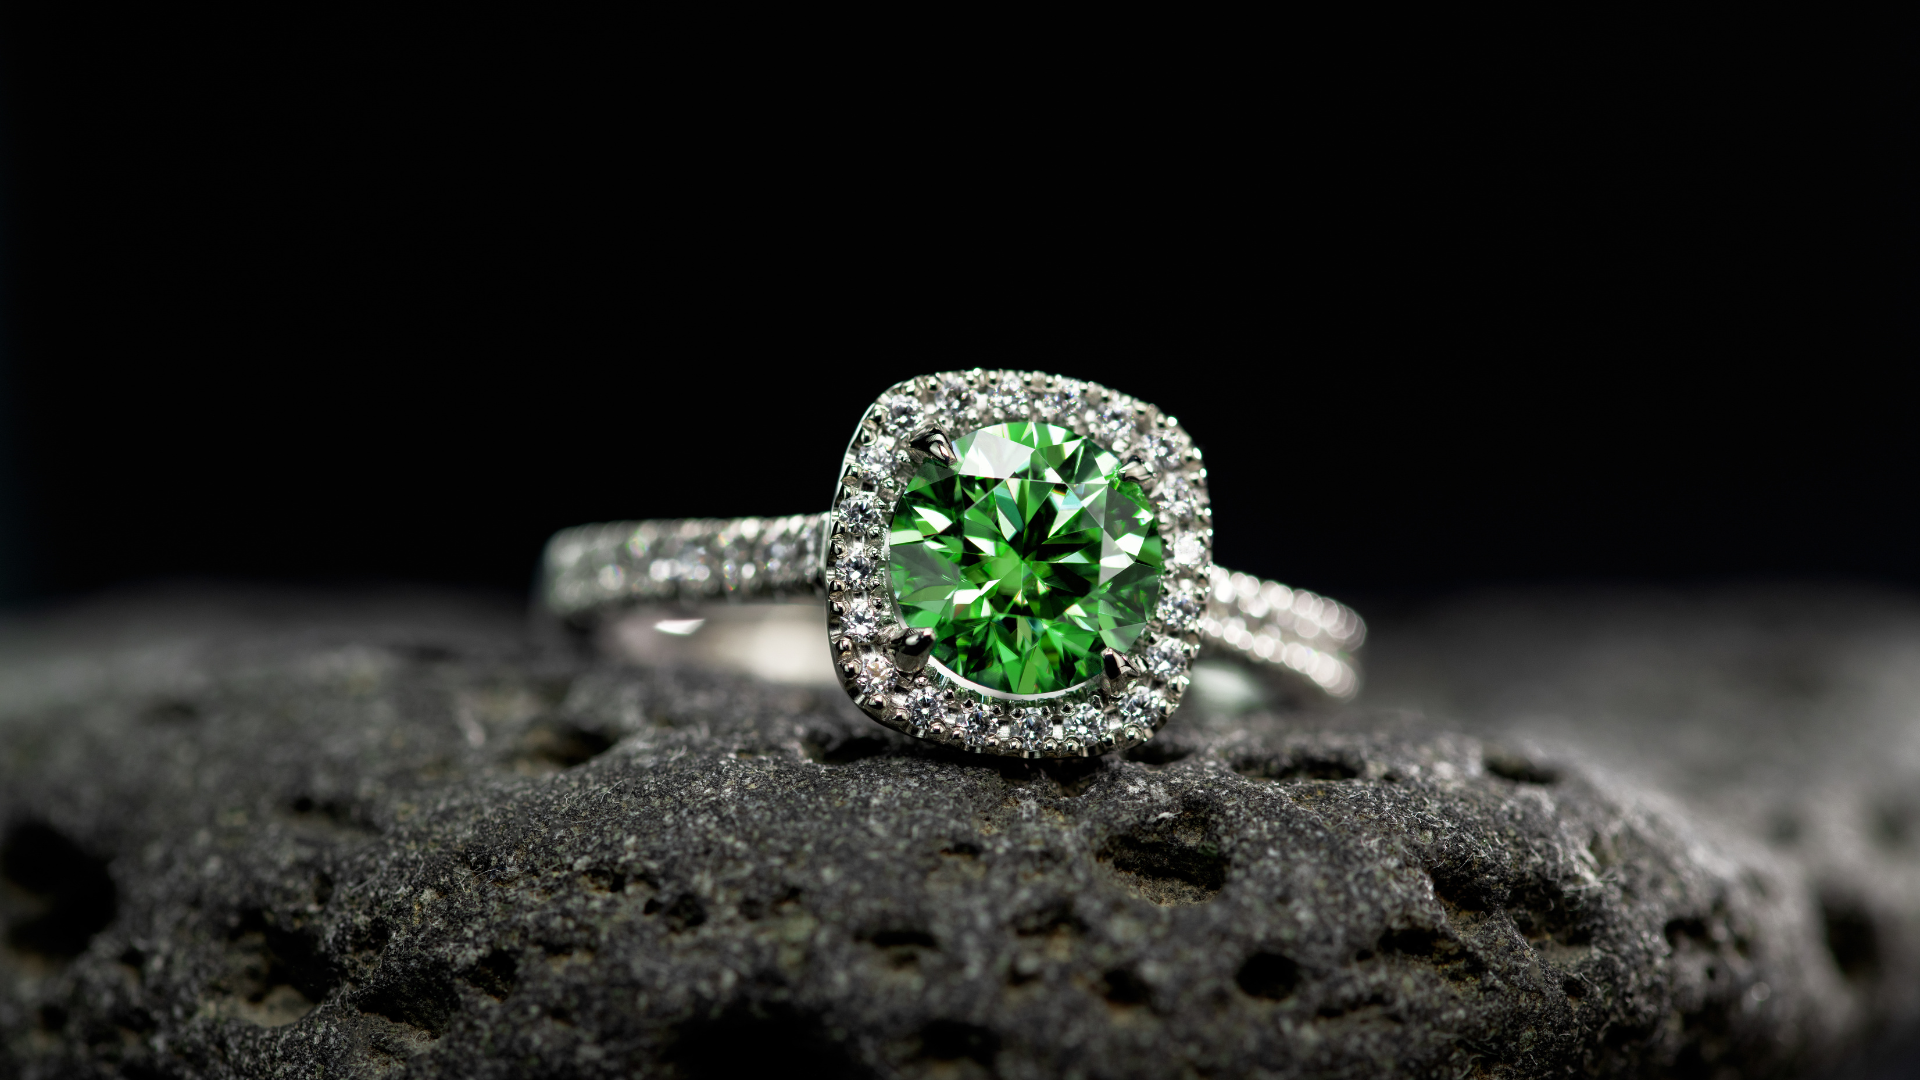 The Ultimate Guide to Finding Engagement Rings Inspired by Nature